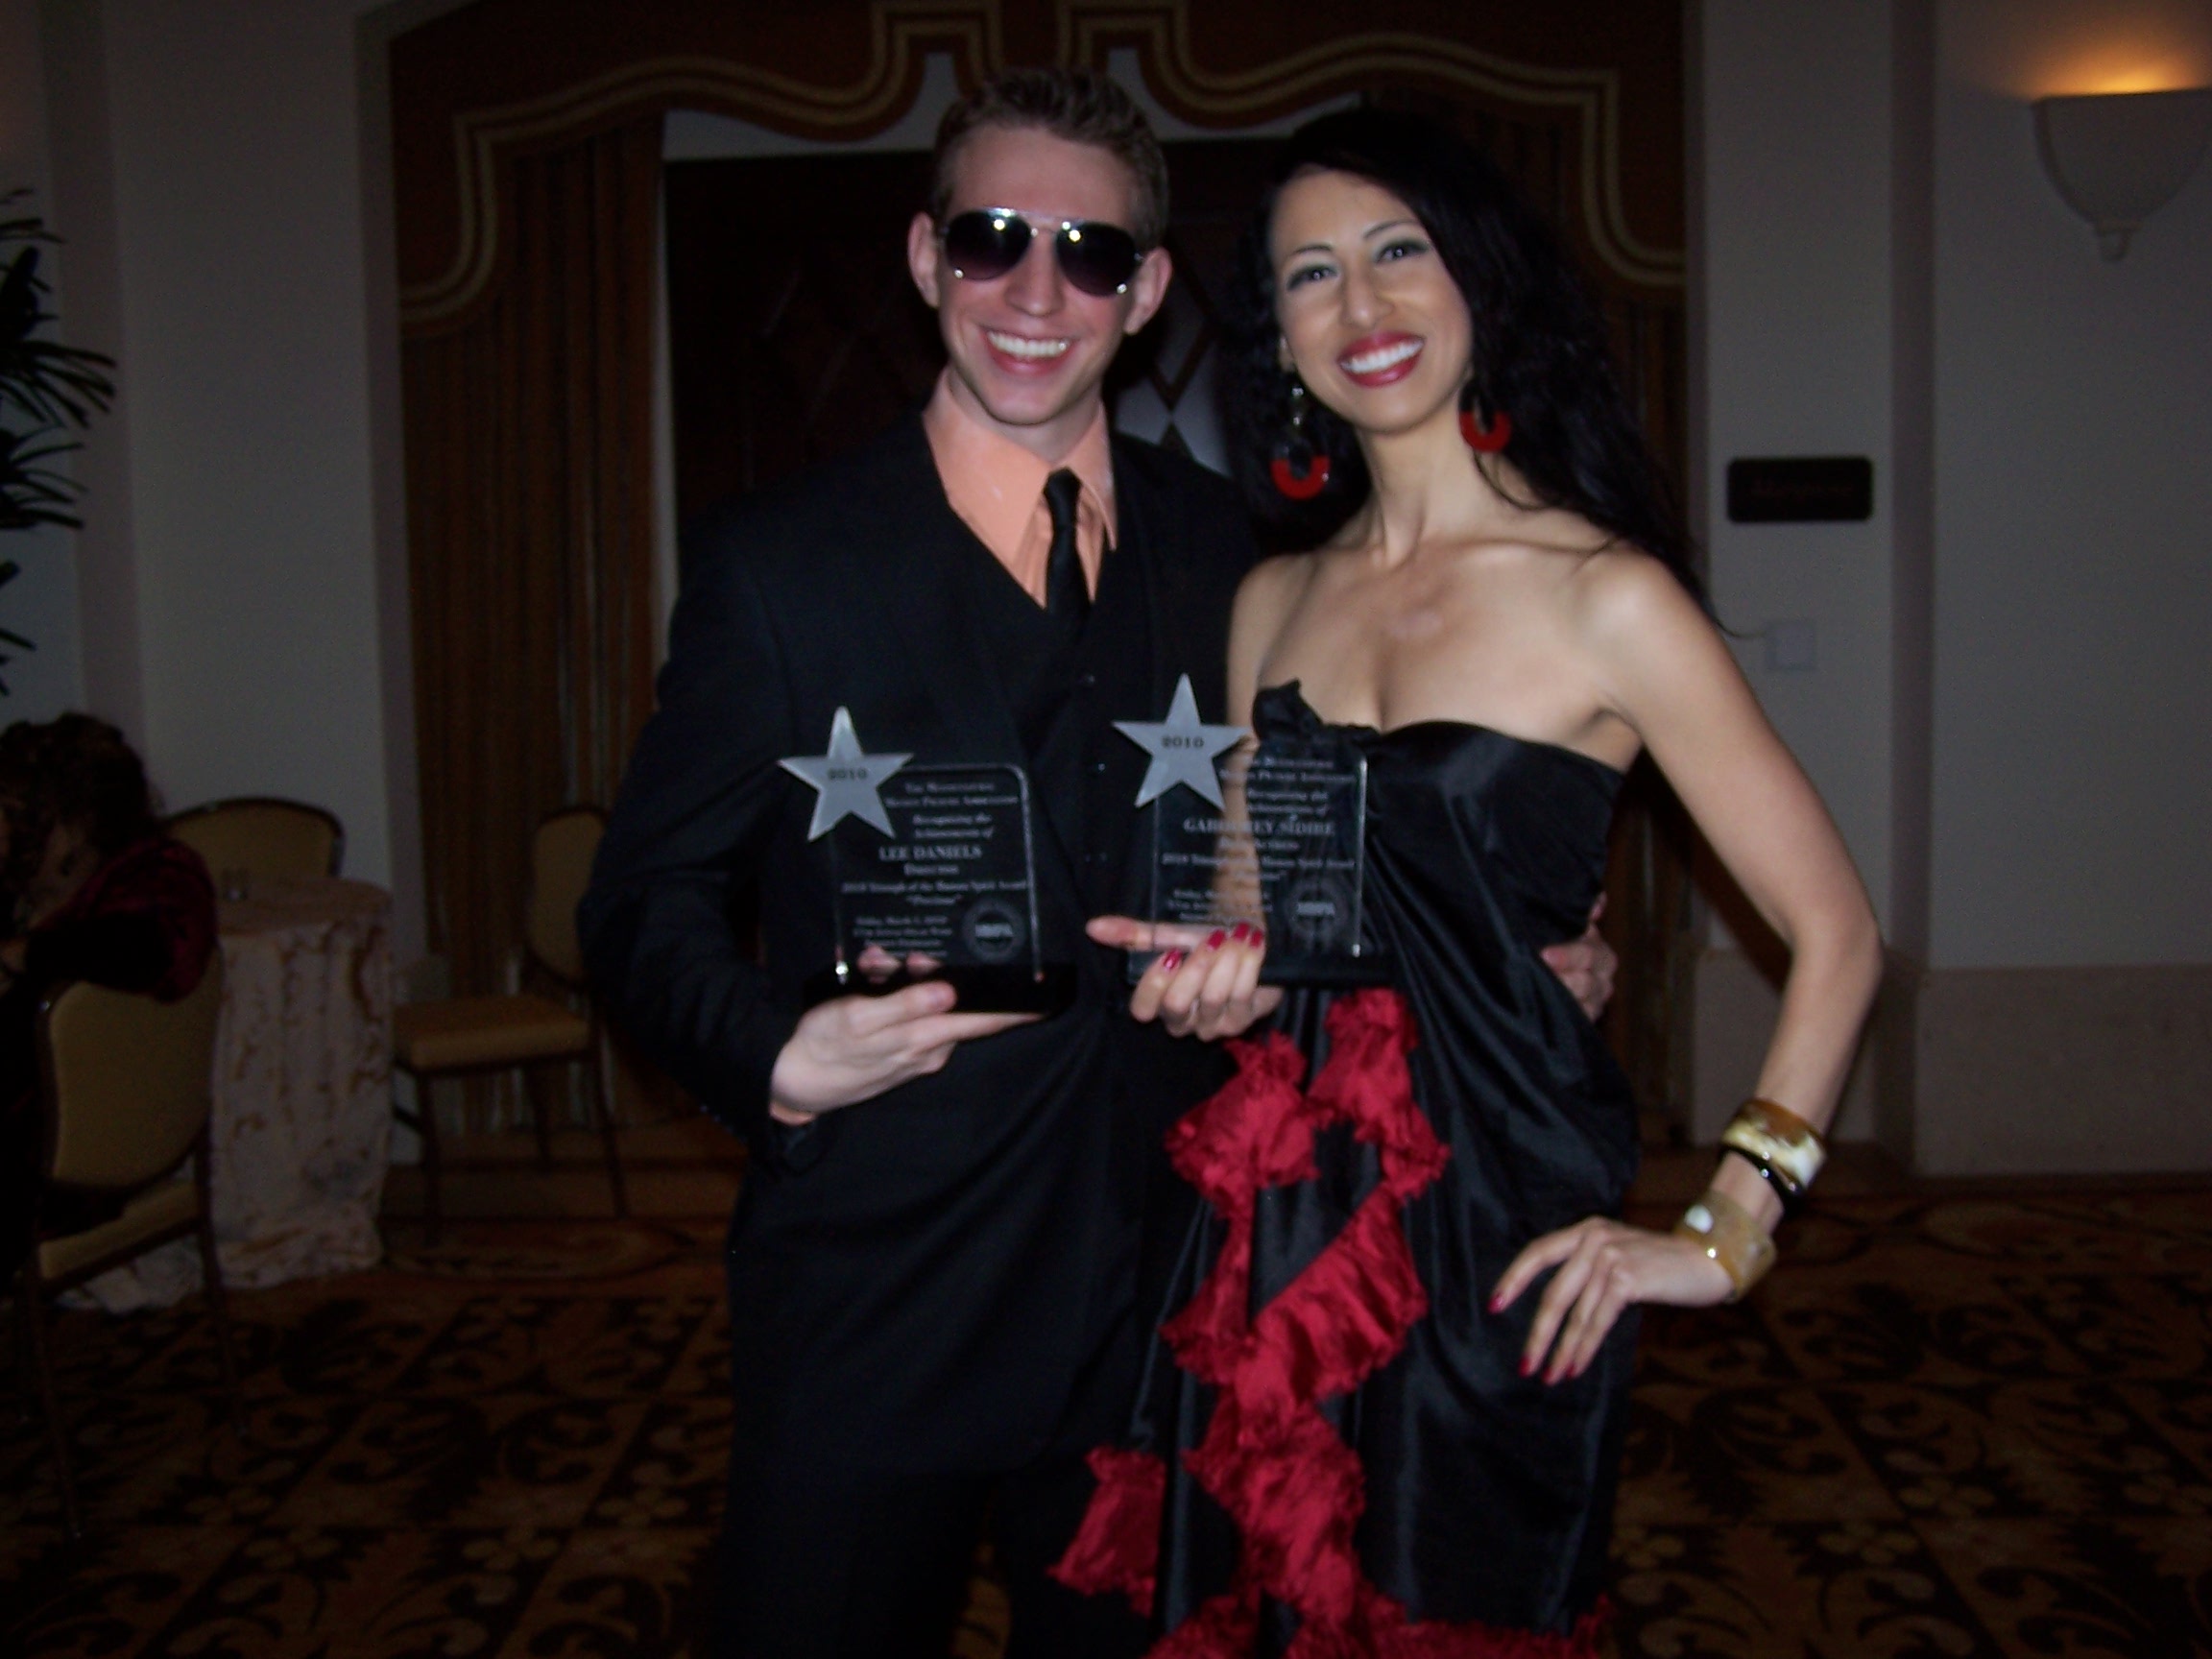 Elly Kaye with Michael Spath at the Oscar's Luncheon